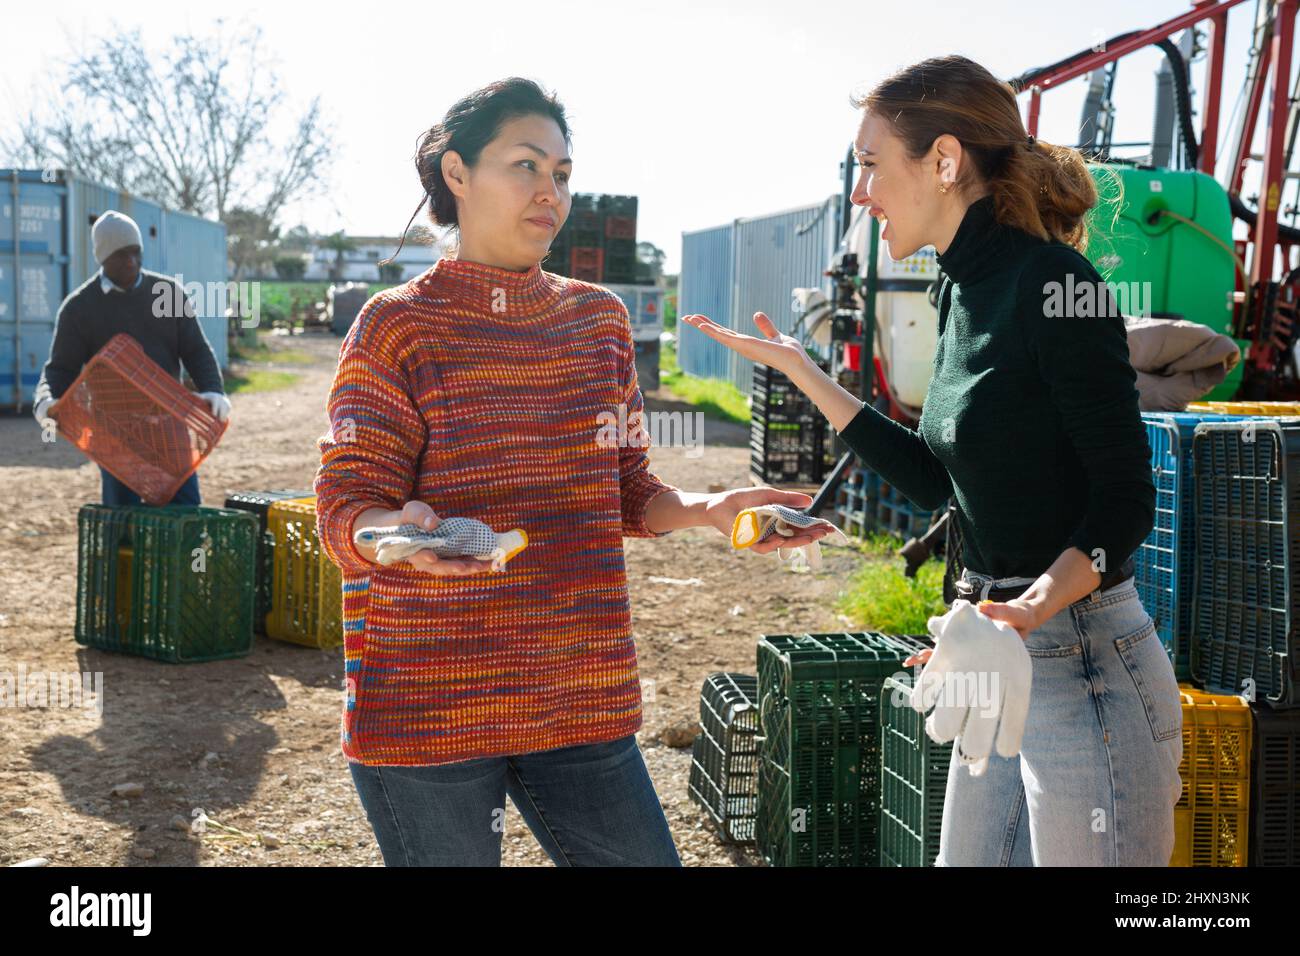 Women agriculturists quarreling outdoors Stock Photo